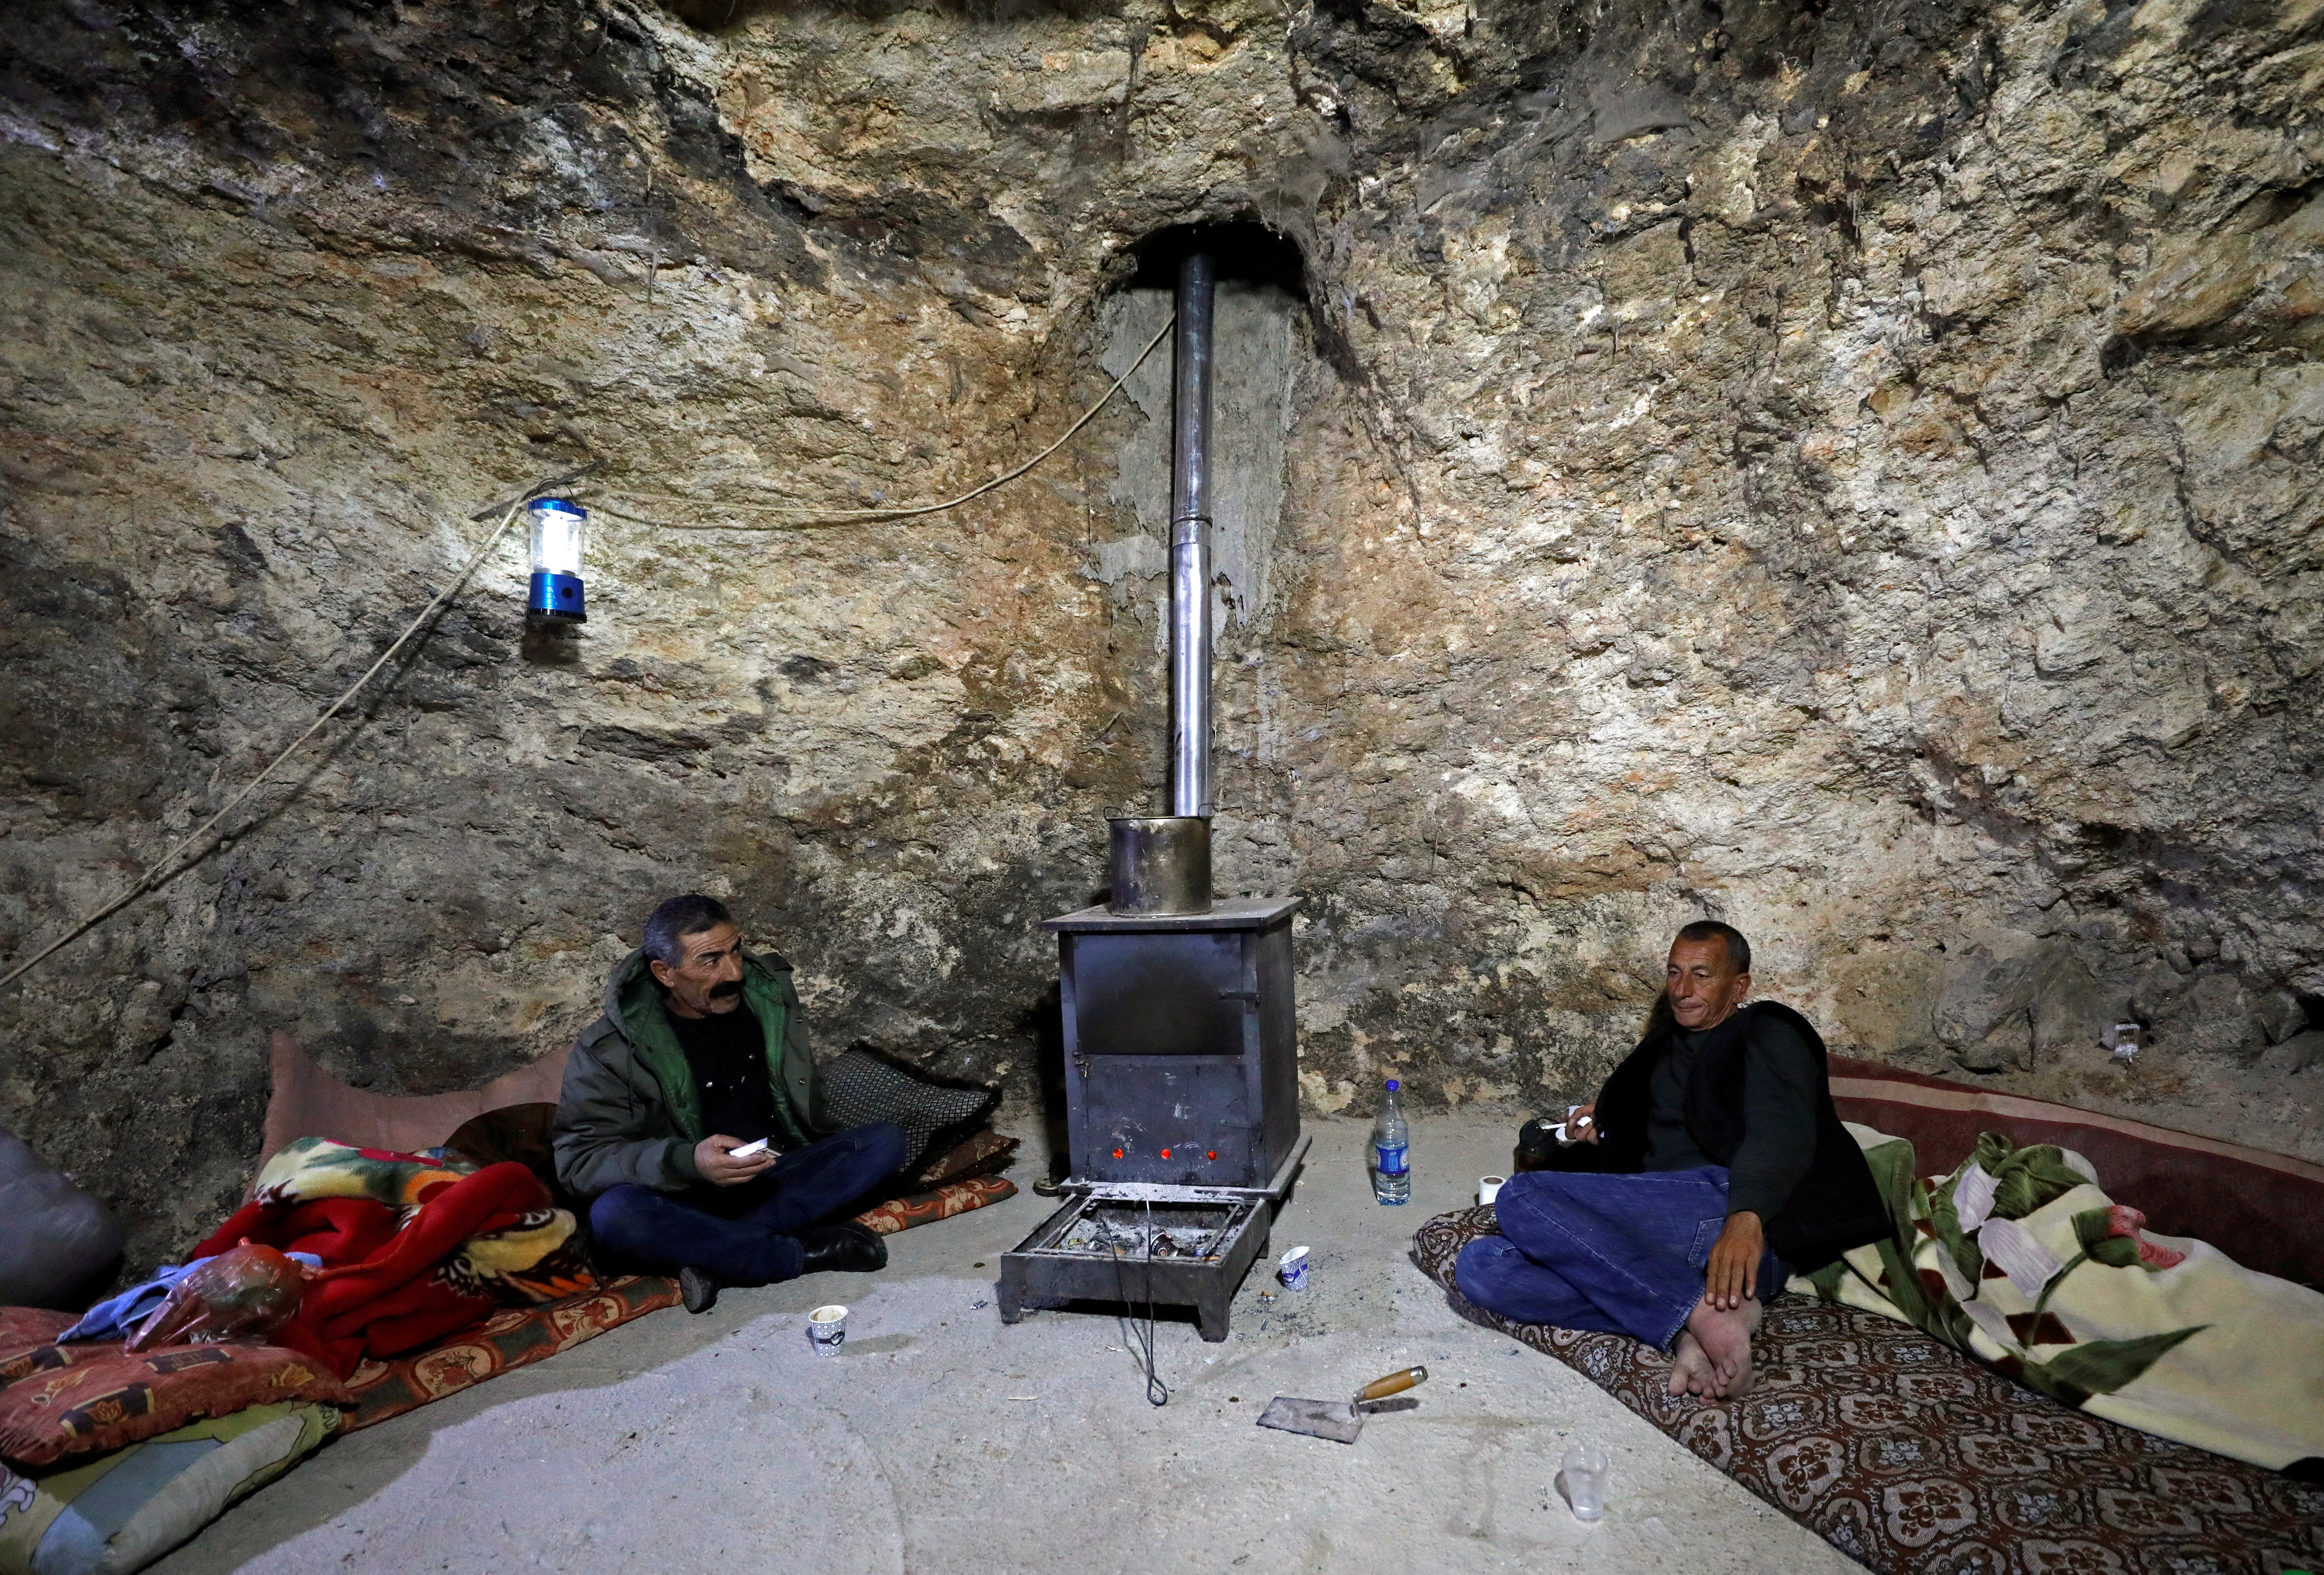 Two Palestinians sit in a hillside cave in Masafer Yatta near Hebron in the Israeli-occupied West Bank